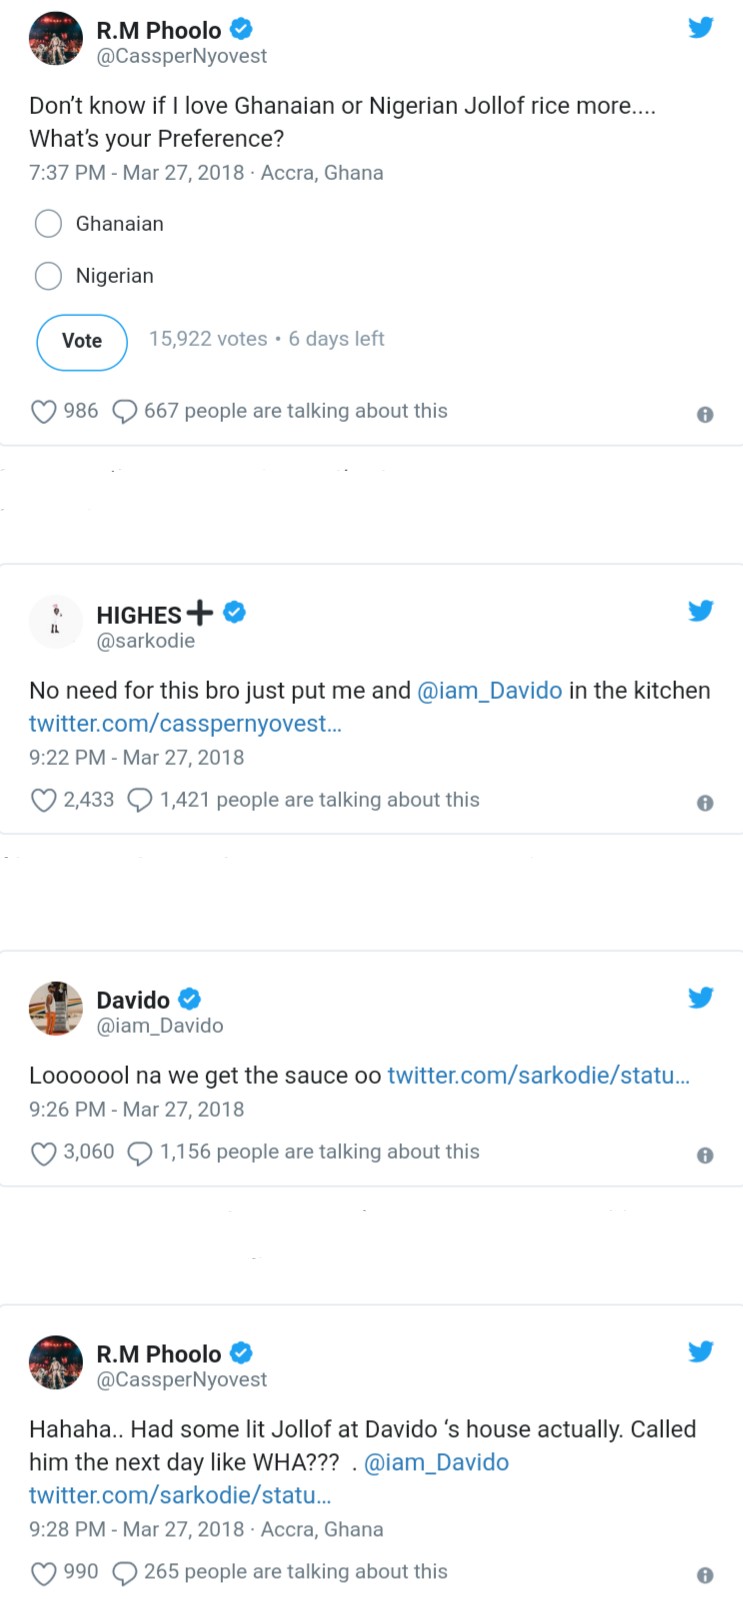 It's On! Sarkodie Challenges Davido To Jollof Cooking Battle After Cassper Nyovest Said He Didn’t Know Which Tastes Better (2)